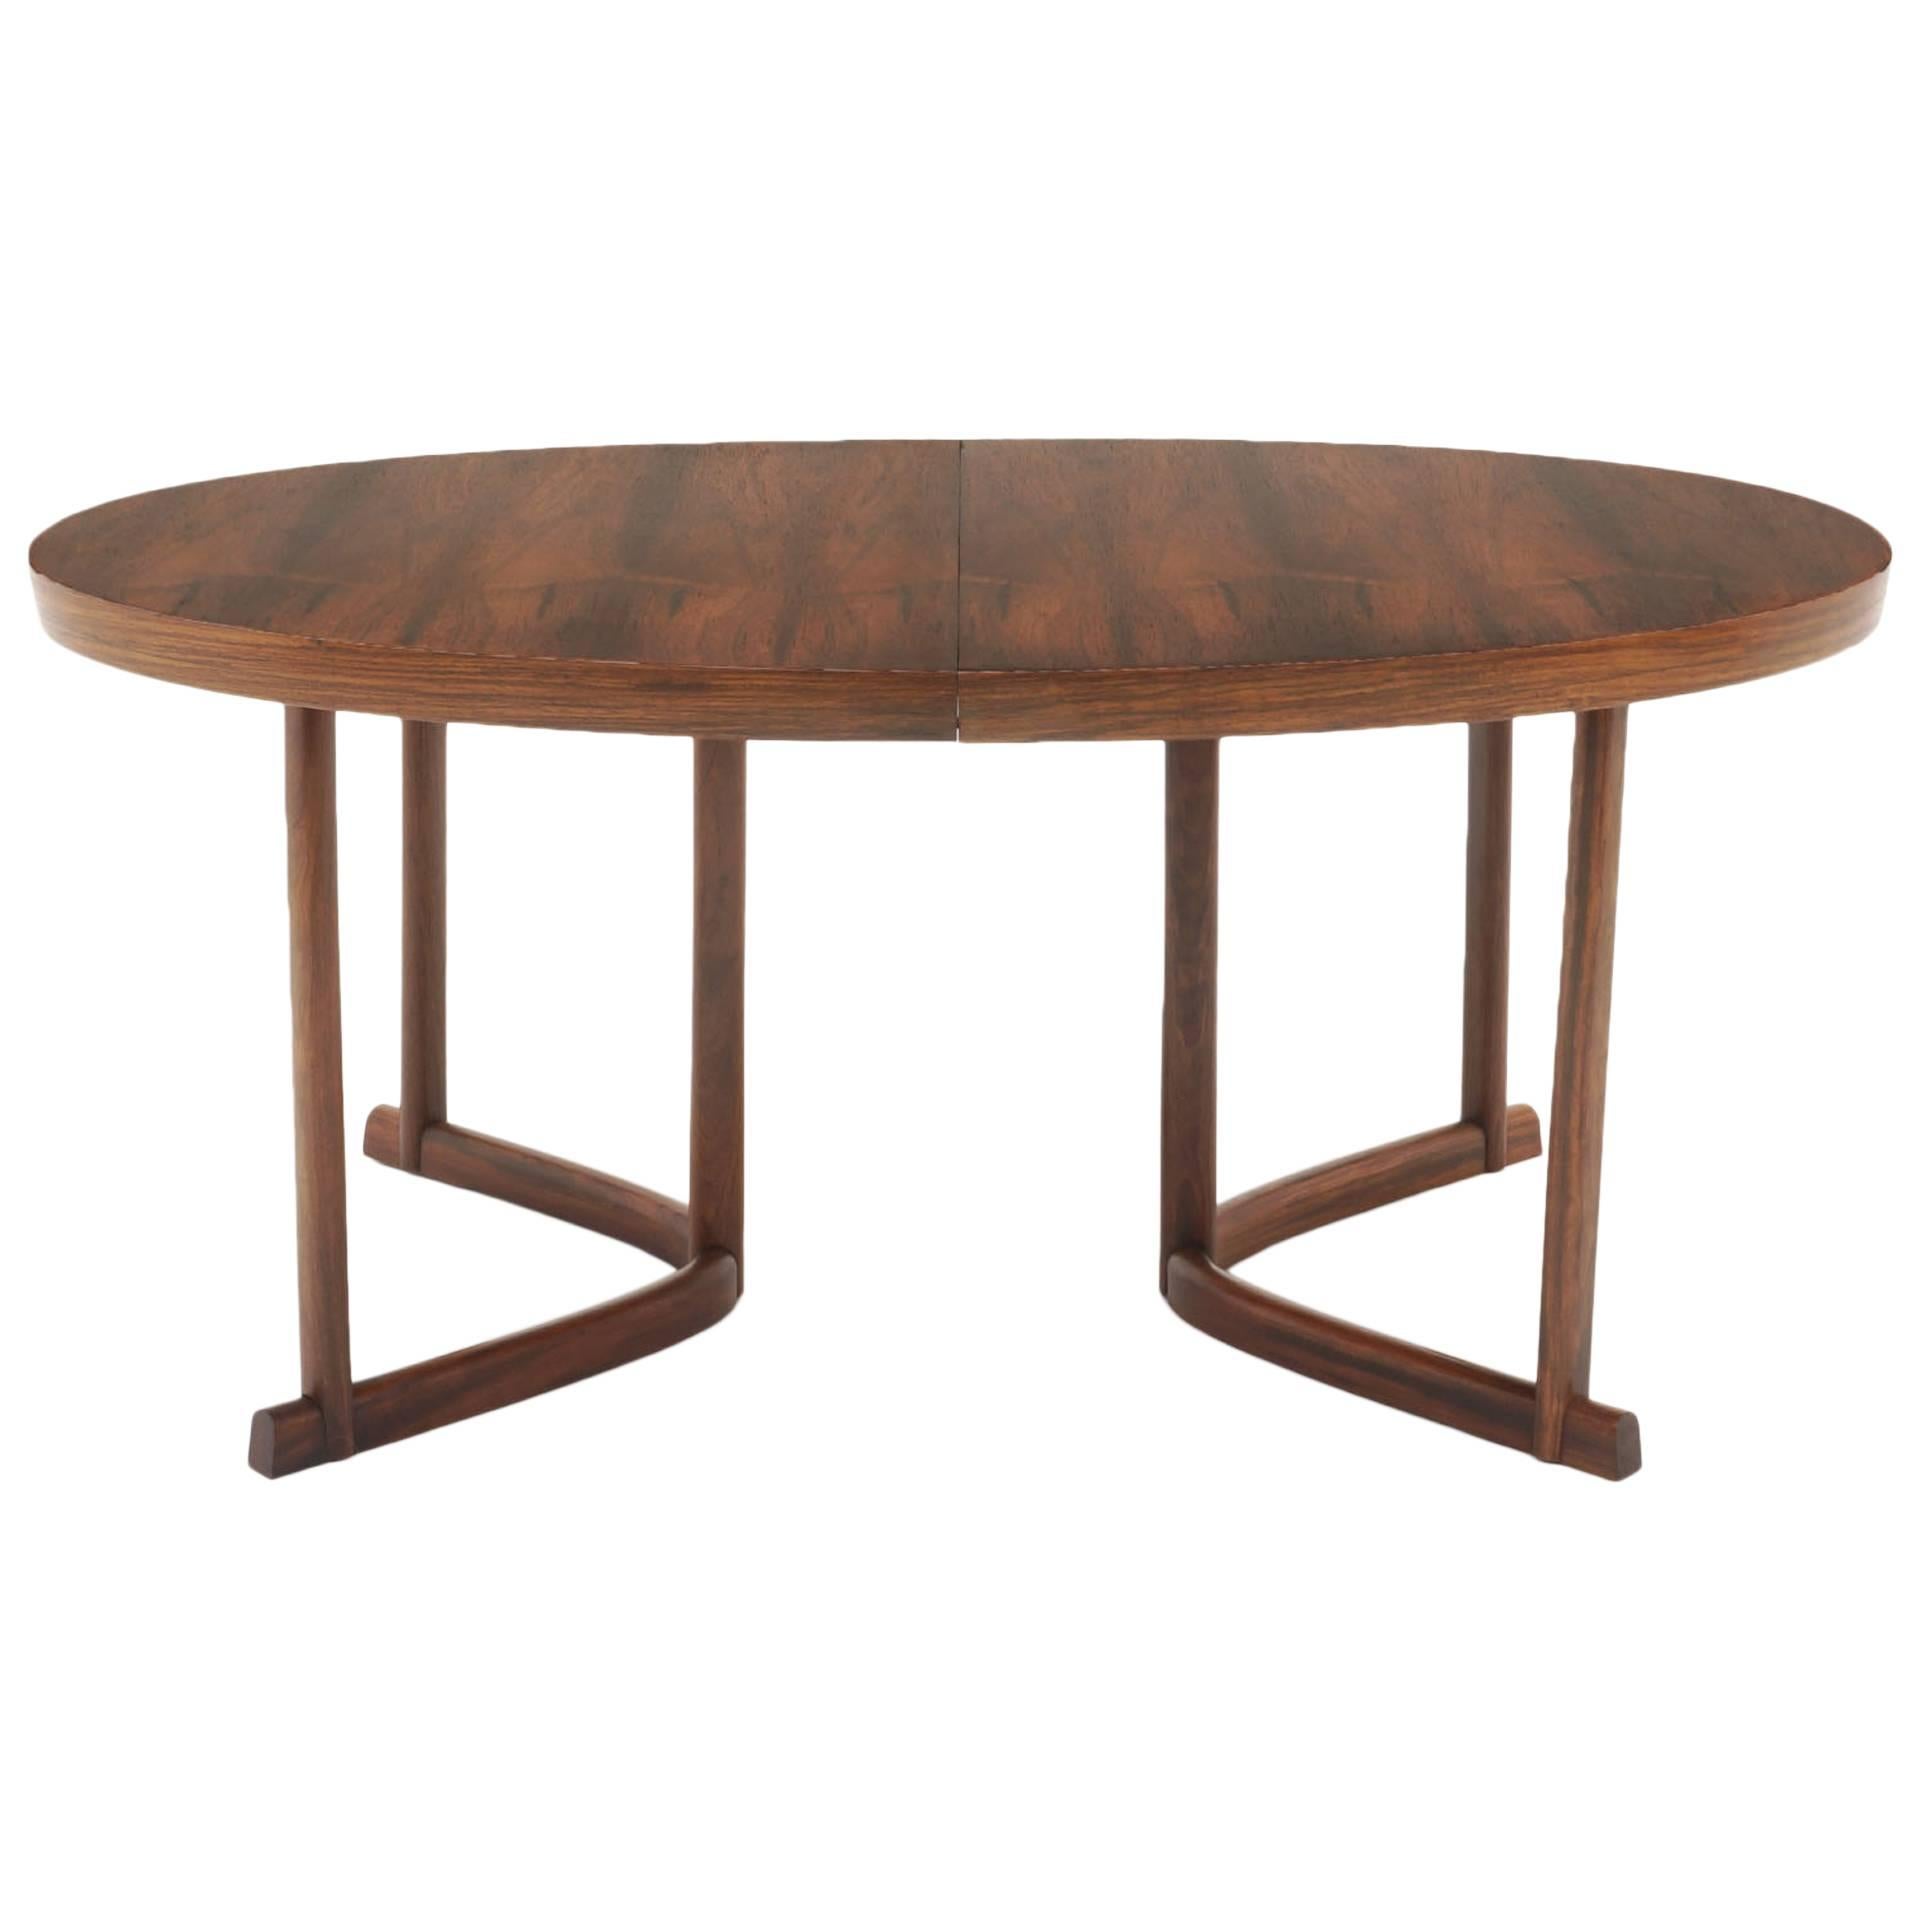 Danish Modern Rosewood Dining Table with Leaf, Excellent Condition